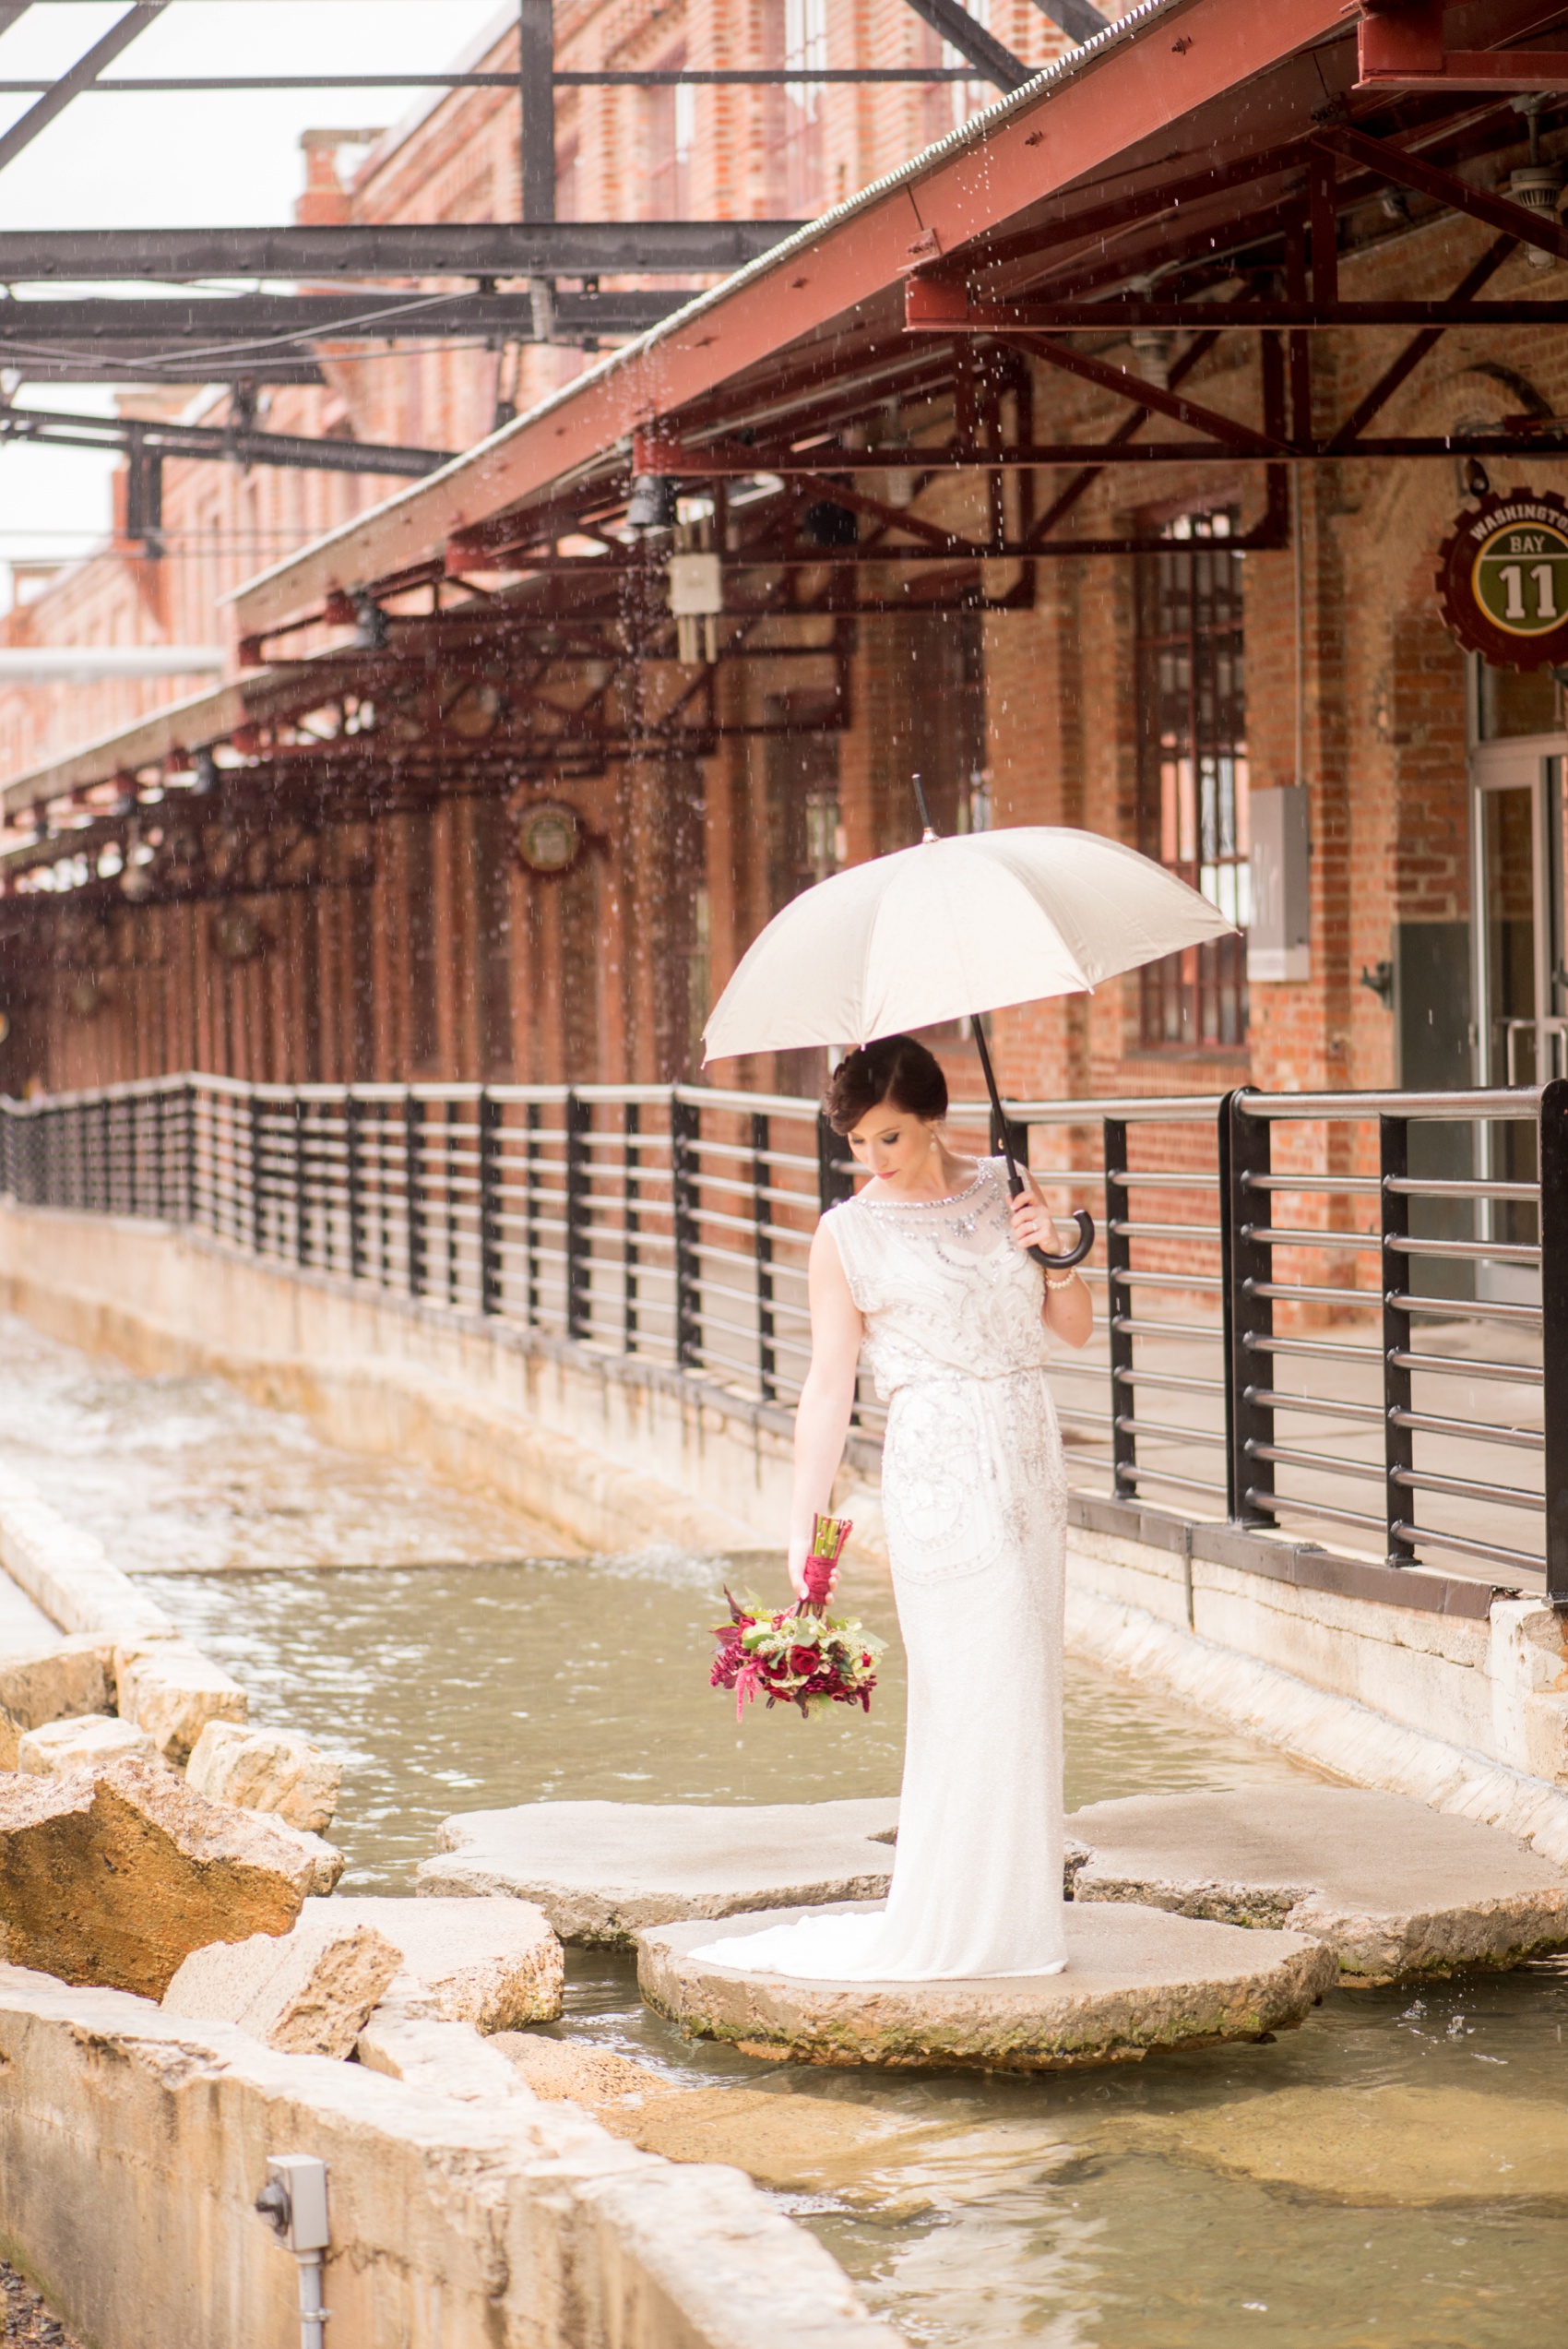 Bay 7 wedding photos by Mikkel Paige Photography. Raleigh wedding photographer captures the bride in her art deco gown in the rain with an umbrella.